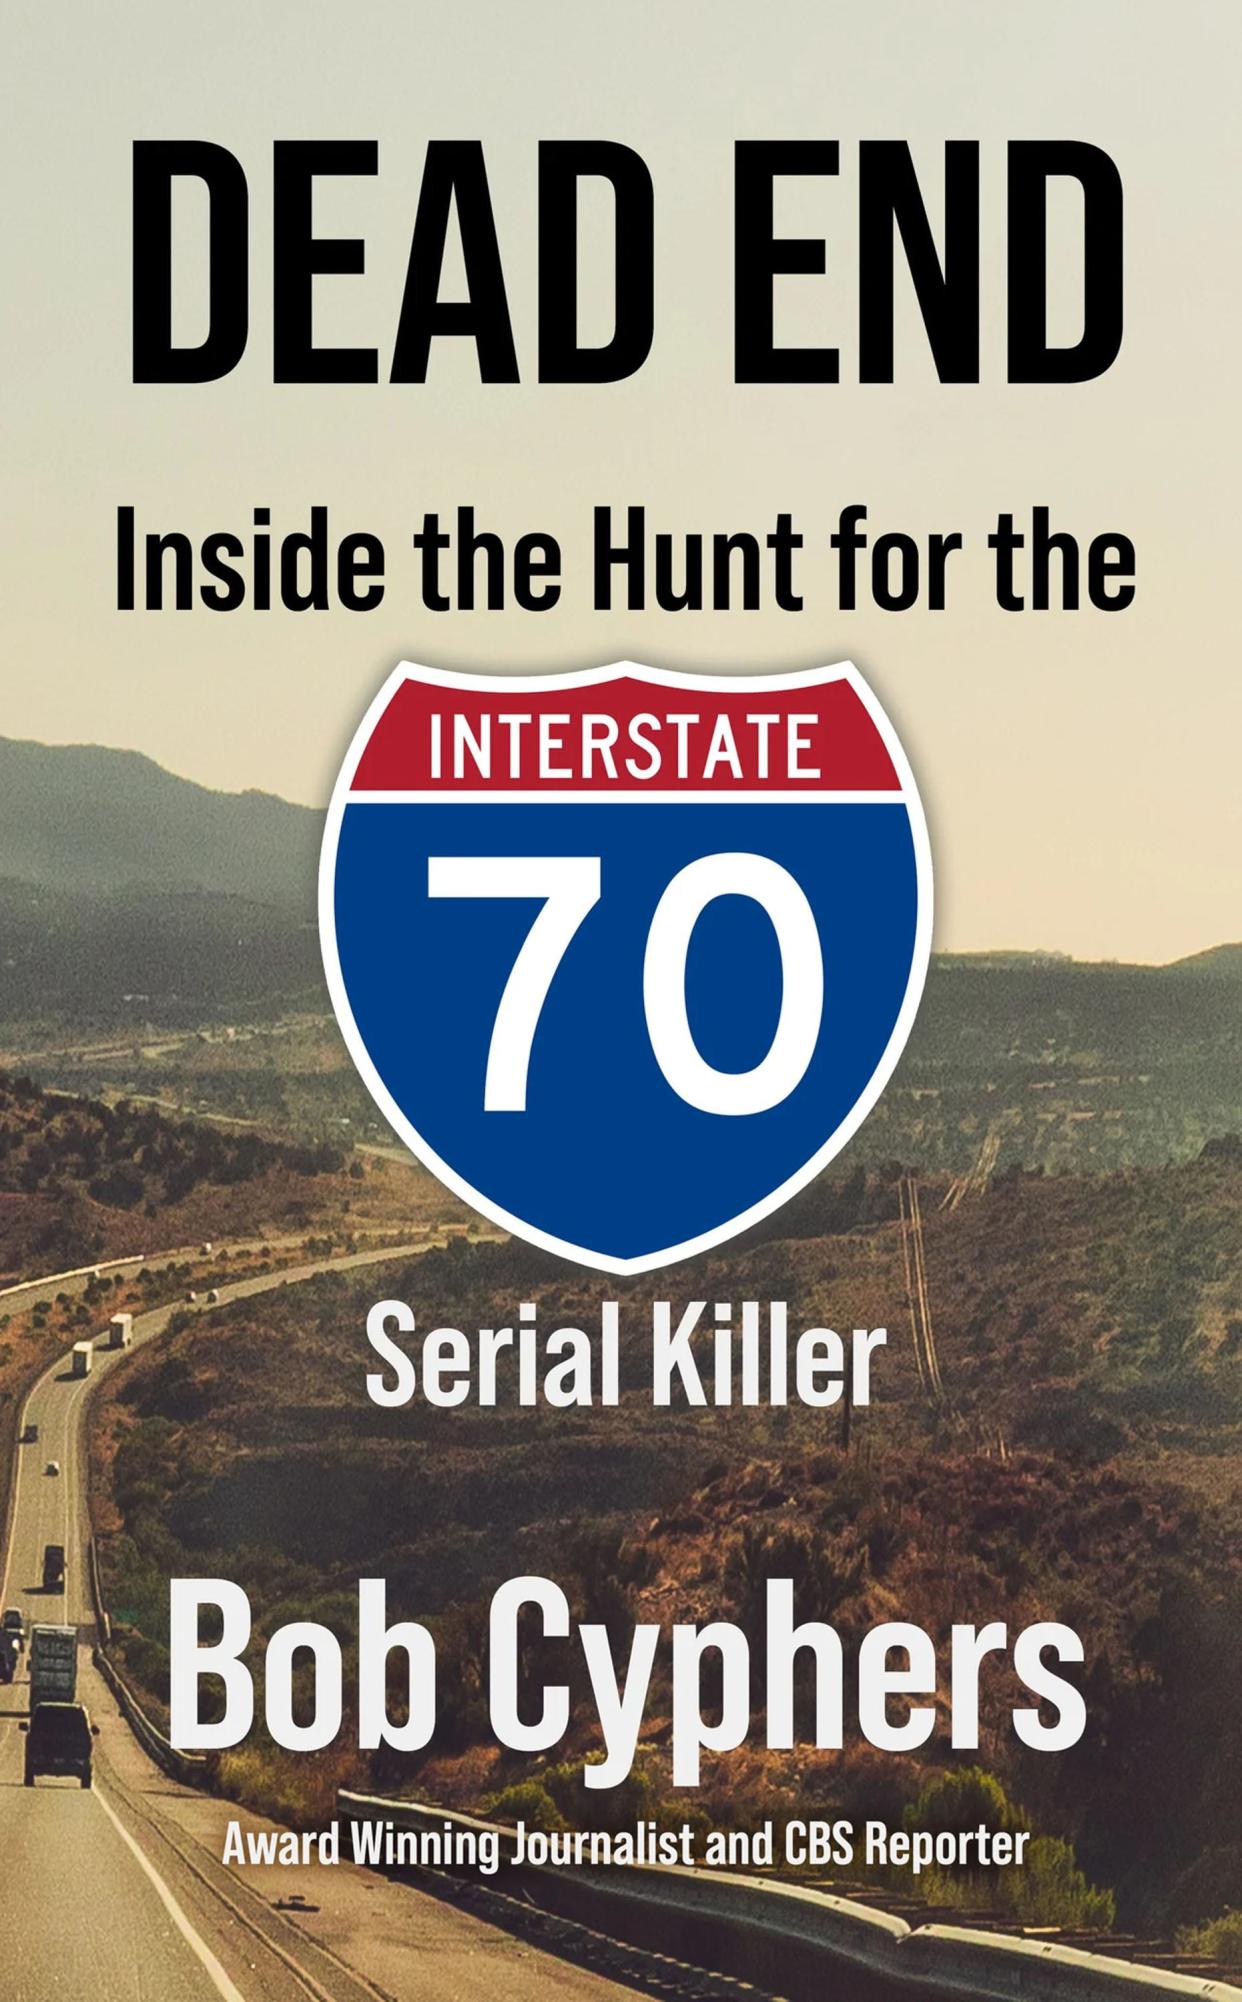 Retired KMOV journalist Bob Cyphers aims to keep the investigation into the I-70 Serial Killer alive with a new book that compiles the investigations of the at least six shooting deaths across the central U.S. and possibly in Texas.